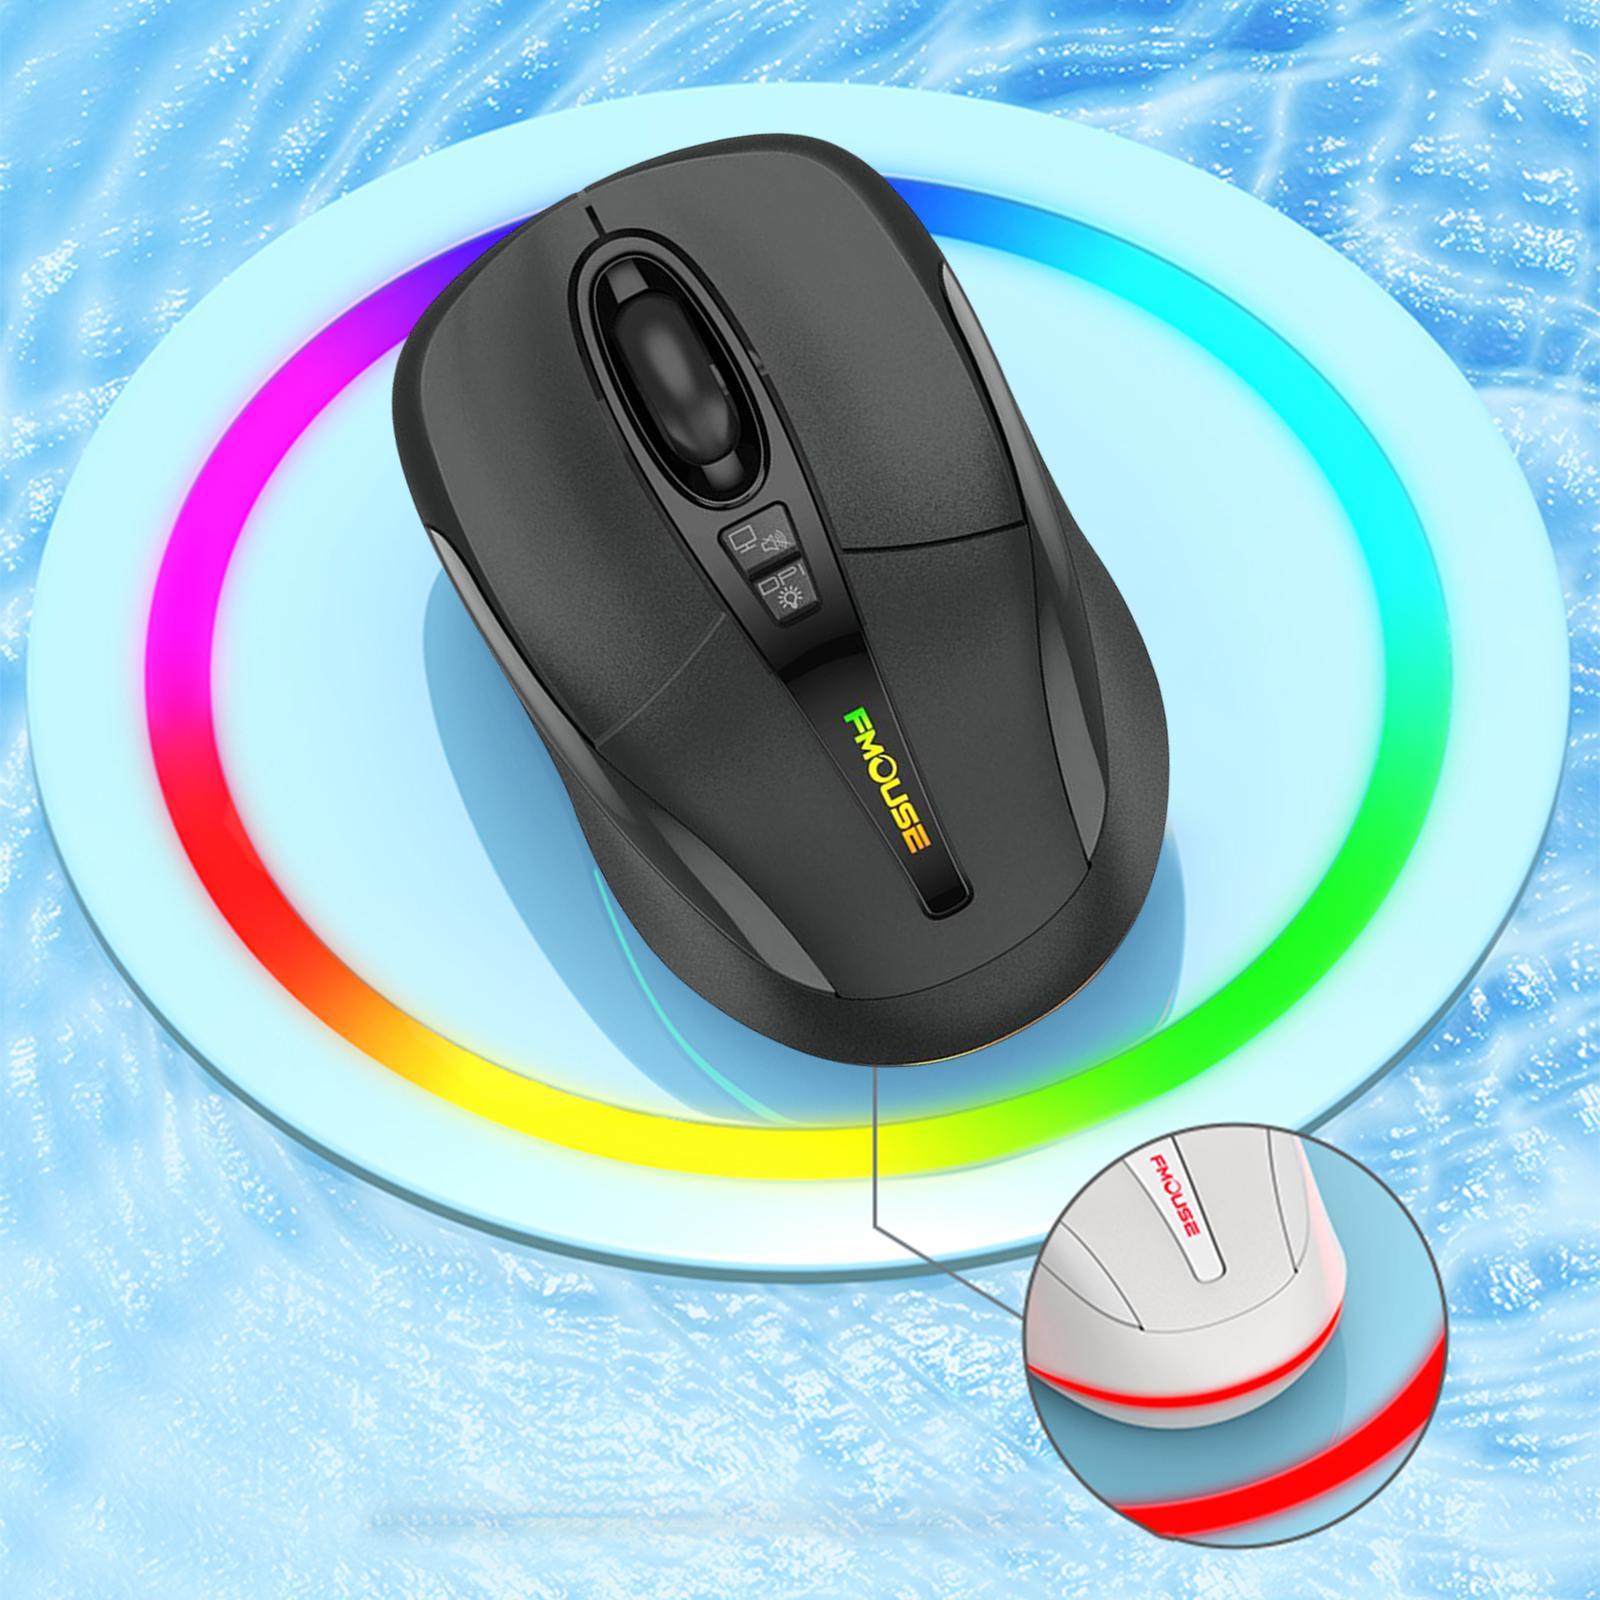 Bluetooth Mouse Portable Type for Windows 8 and above Office Elegant Black